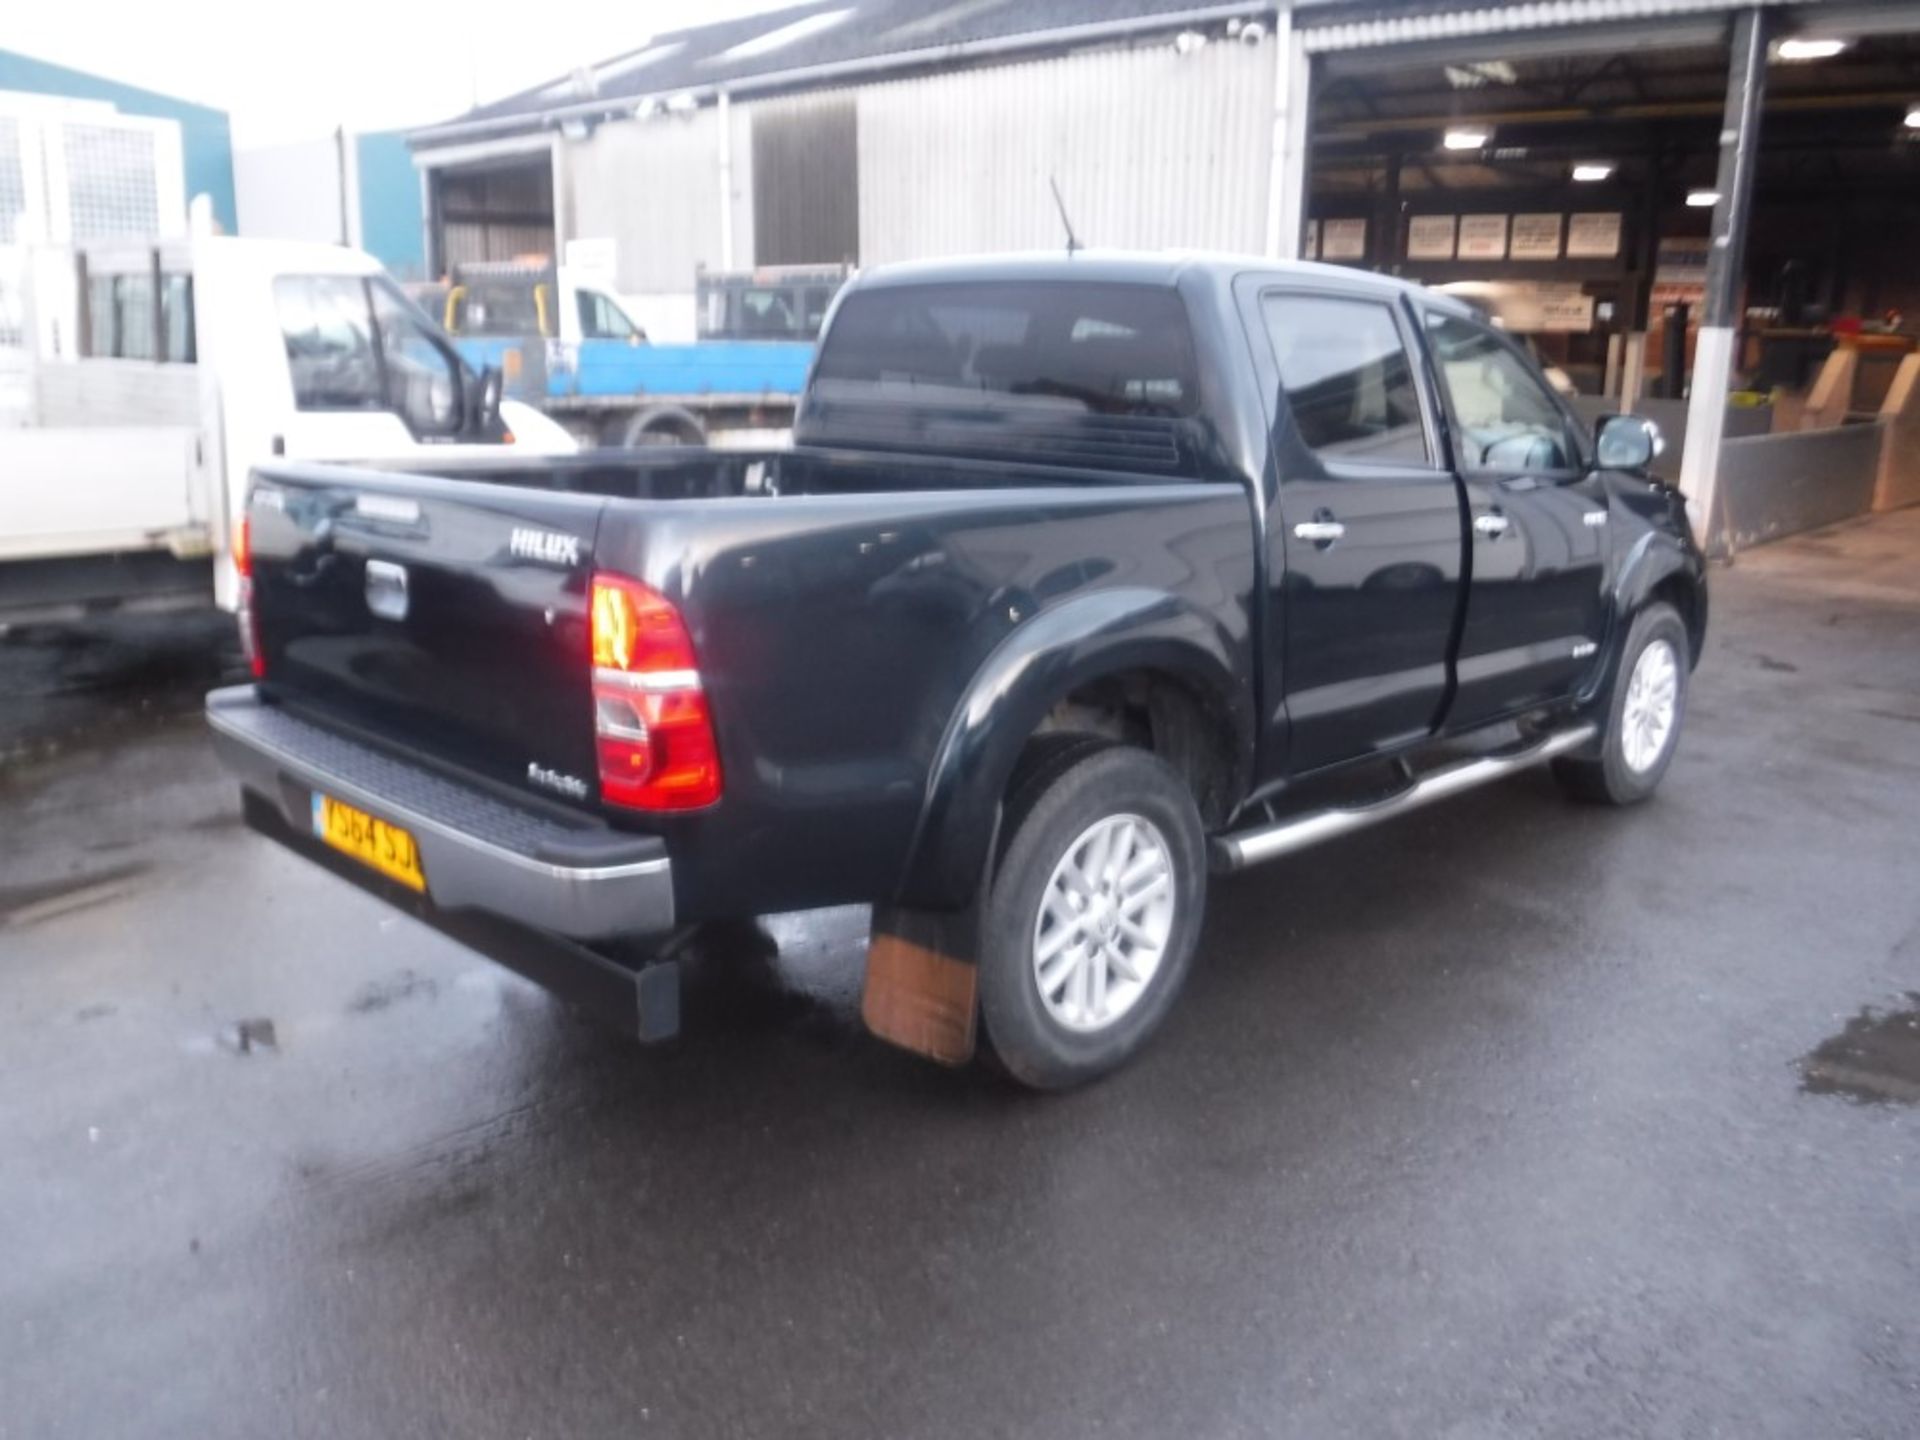 64 reg TOYOTA HI-LUX INVINCIBLE D-4D 4 X 4, 1ST REG 12/14, 48121M WARRANTED, V5 HERE, 1 OWNER FROM - Image 4 of 5